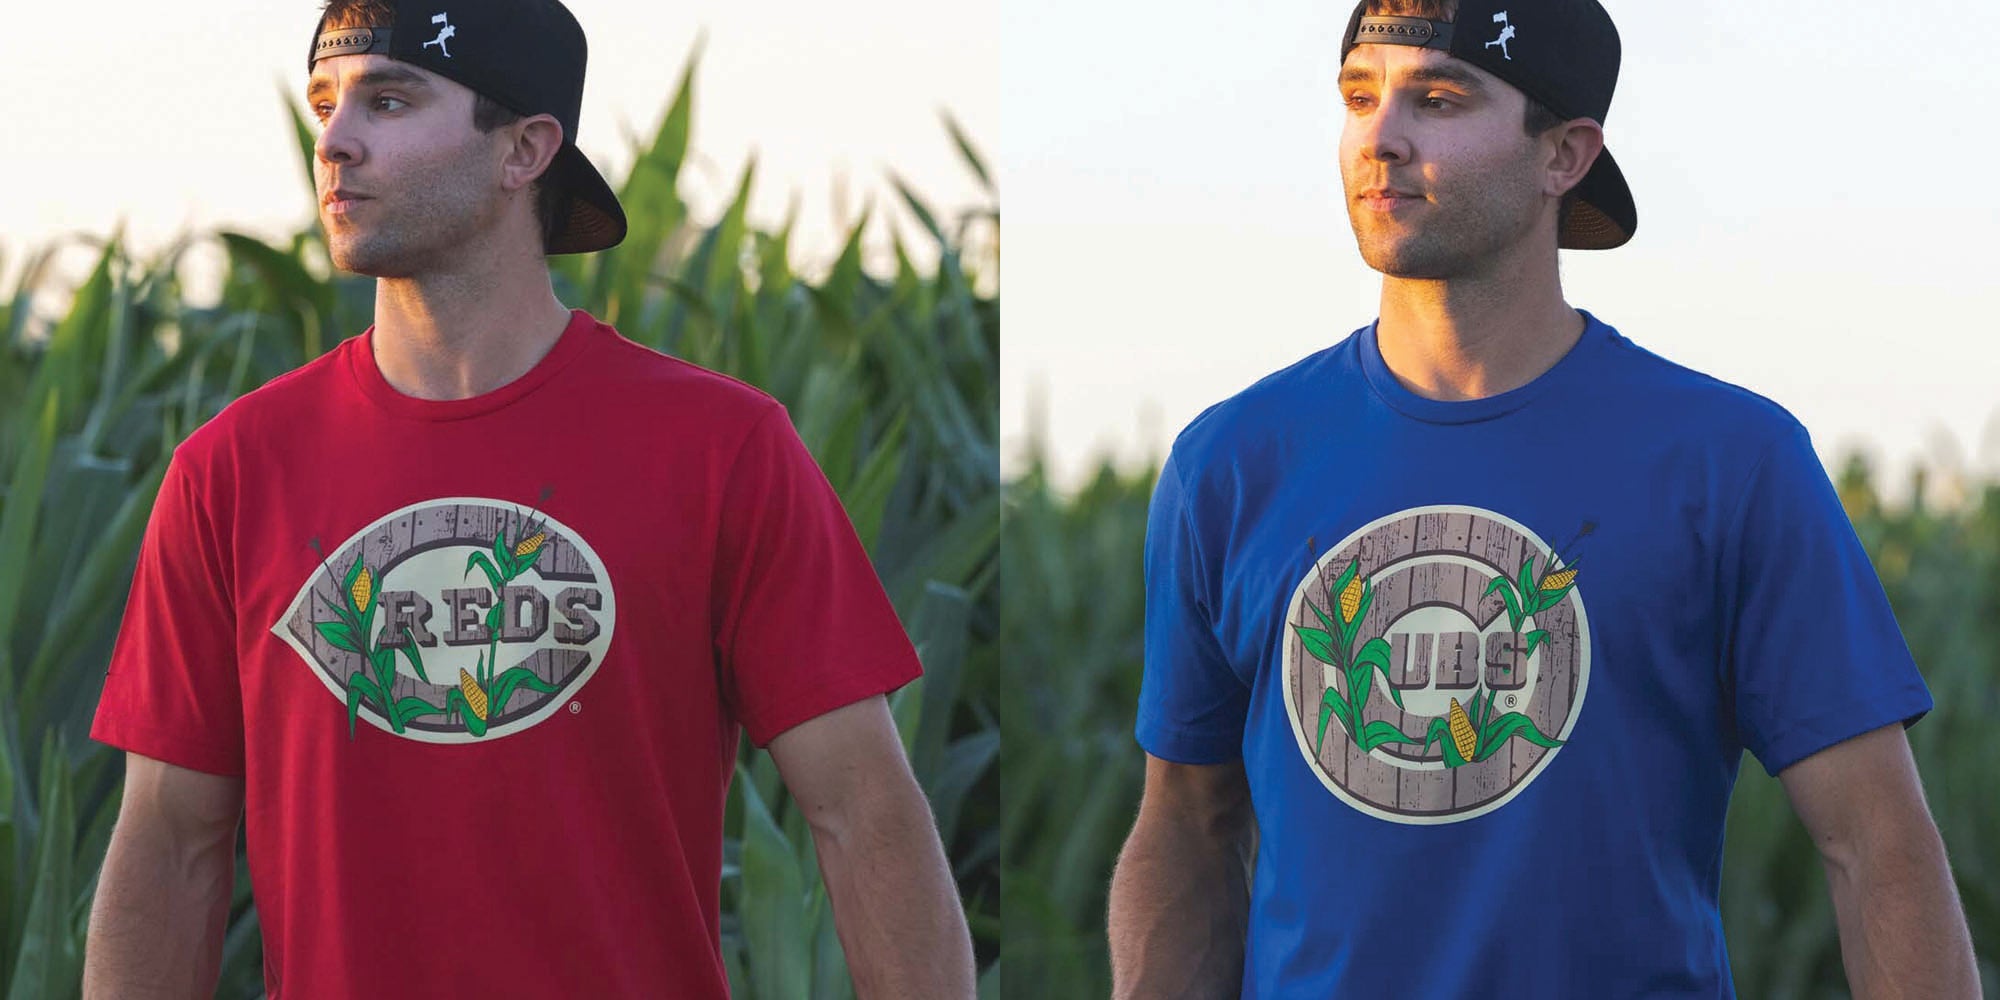 Field of Dreams Game 2022 jerseys, shirts, hats and where to get